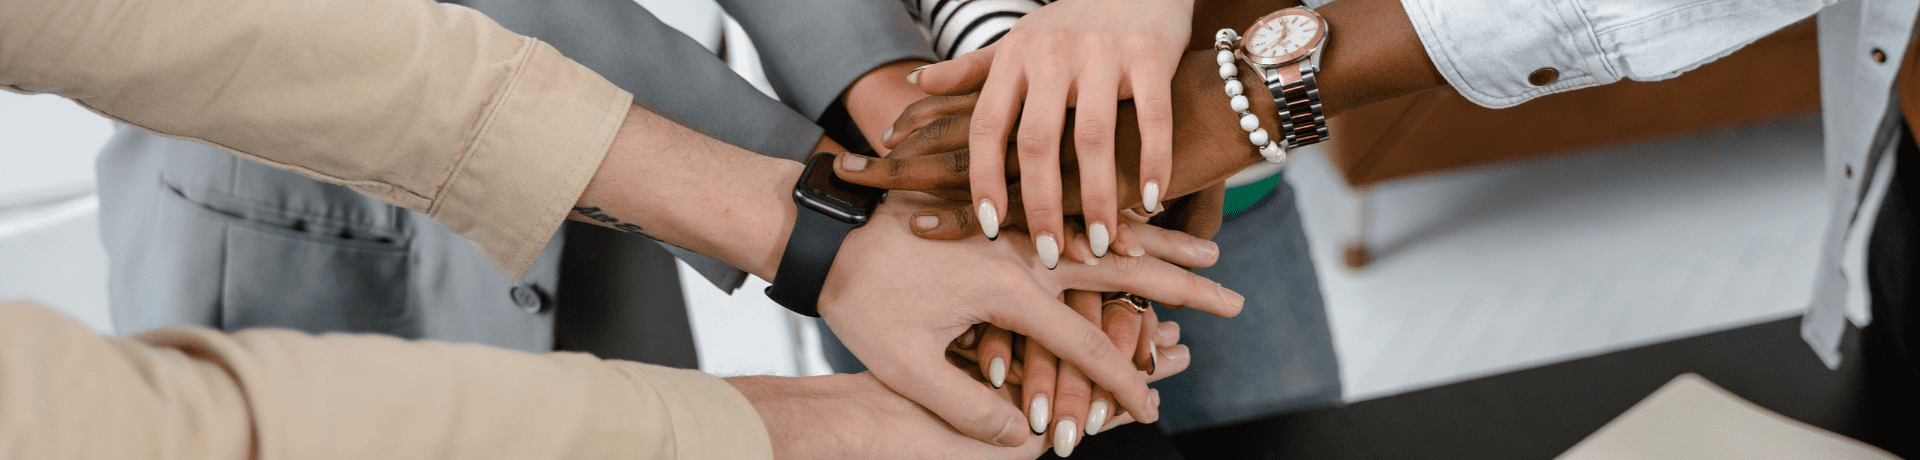 Hands all gathered in a circle, showing that they are all coming together as a team